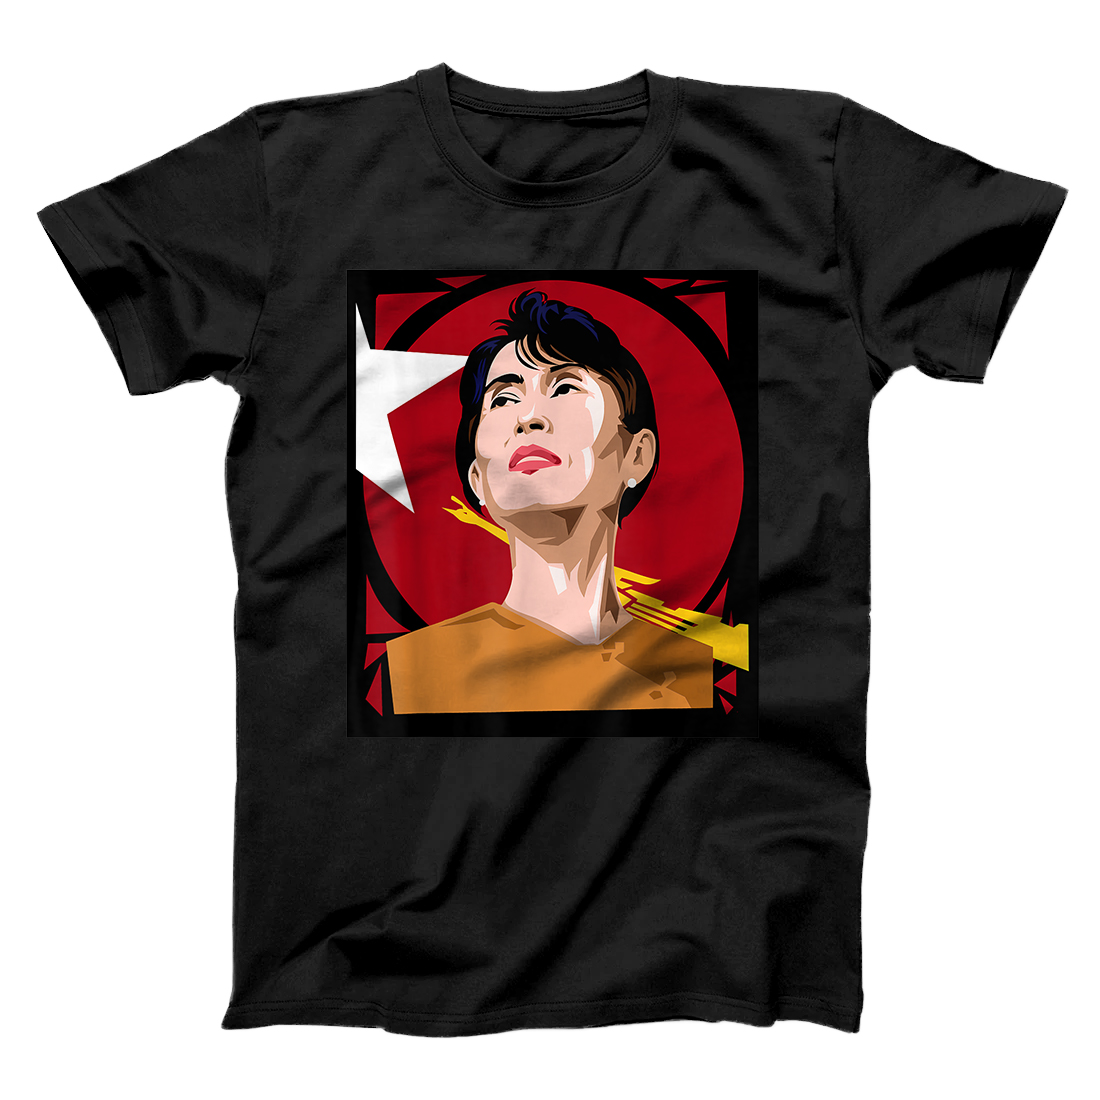 Personalized Aung San Suu Kyi's NLD - People's NLD T-Shirt